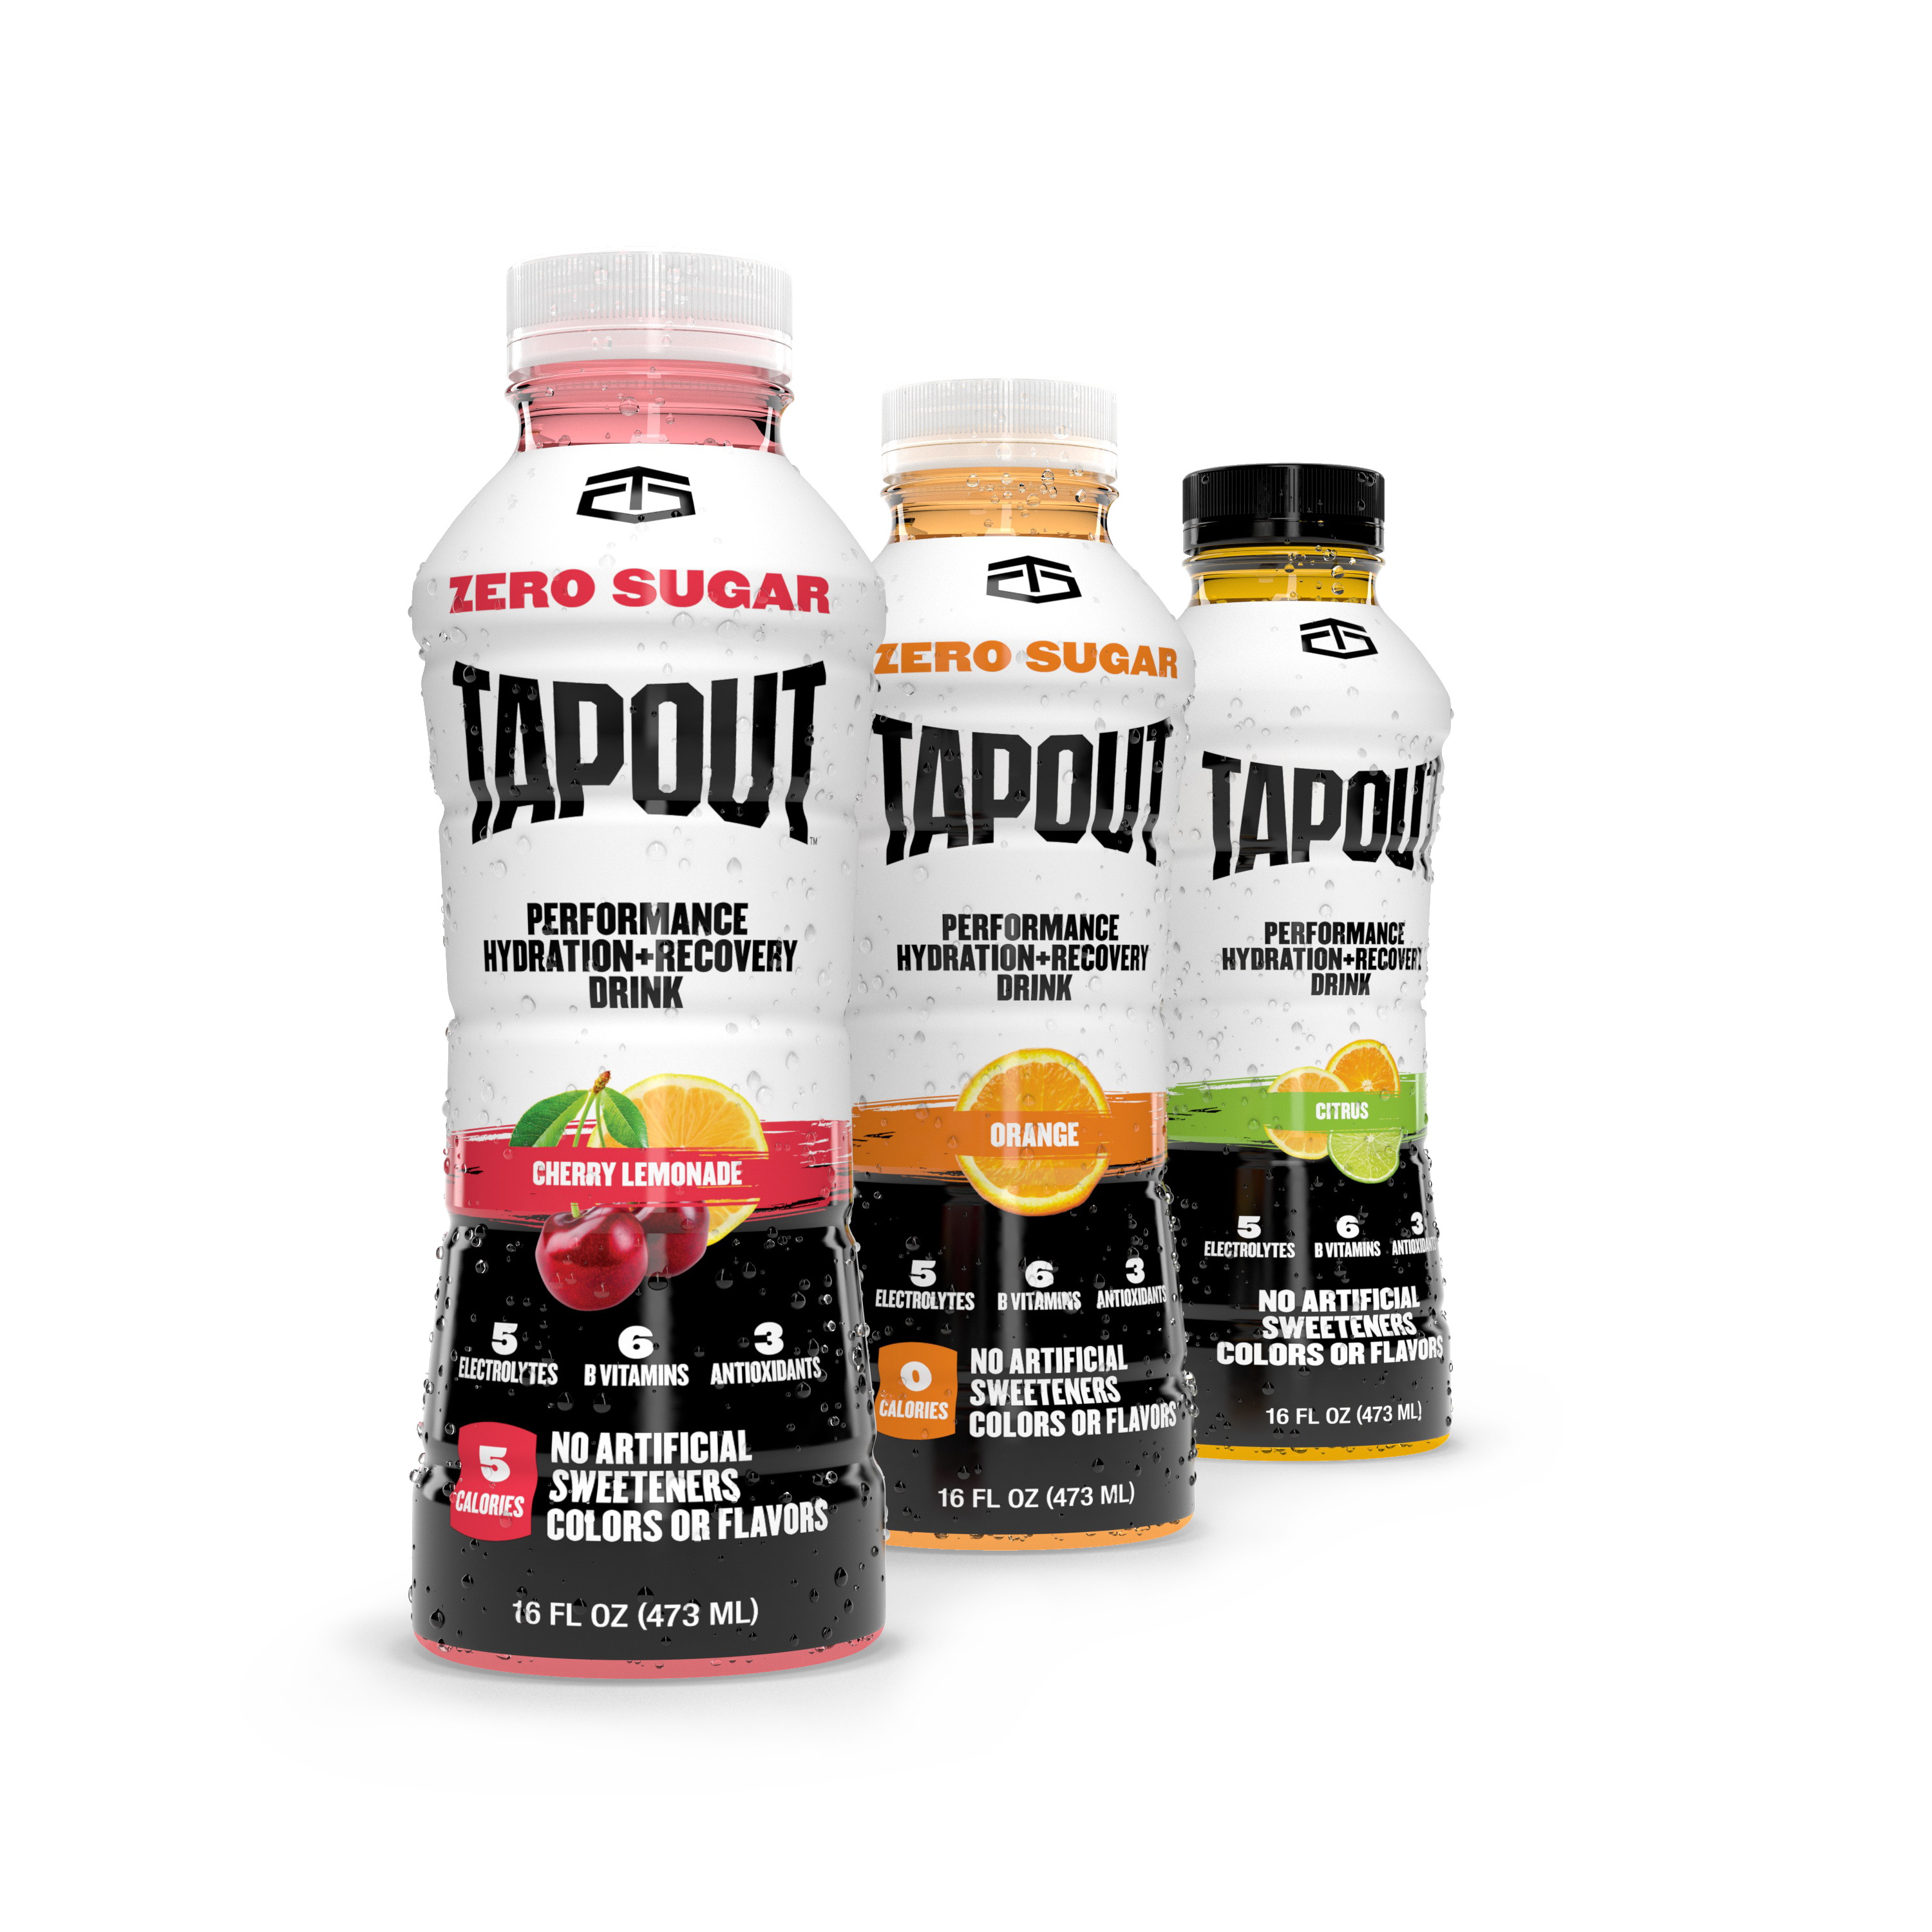 TapouT performance drink